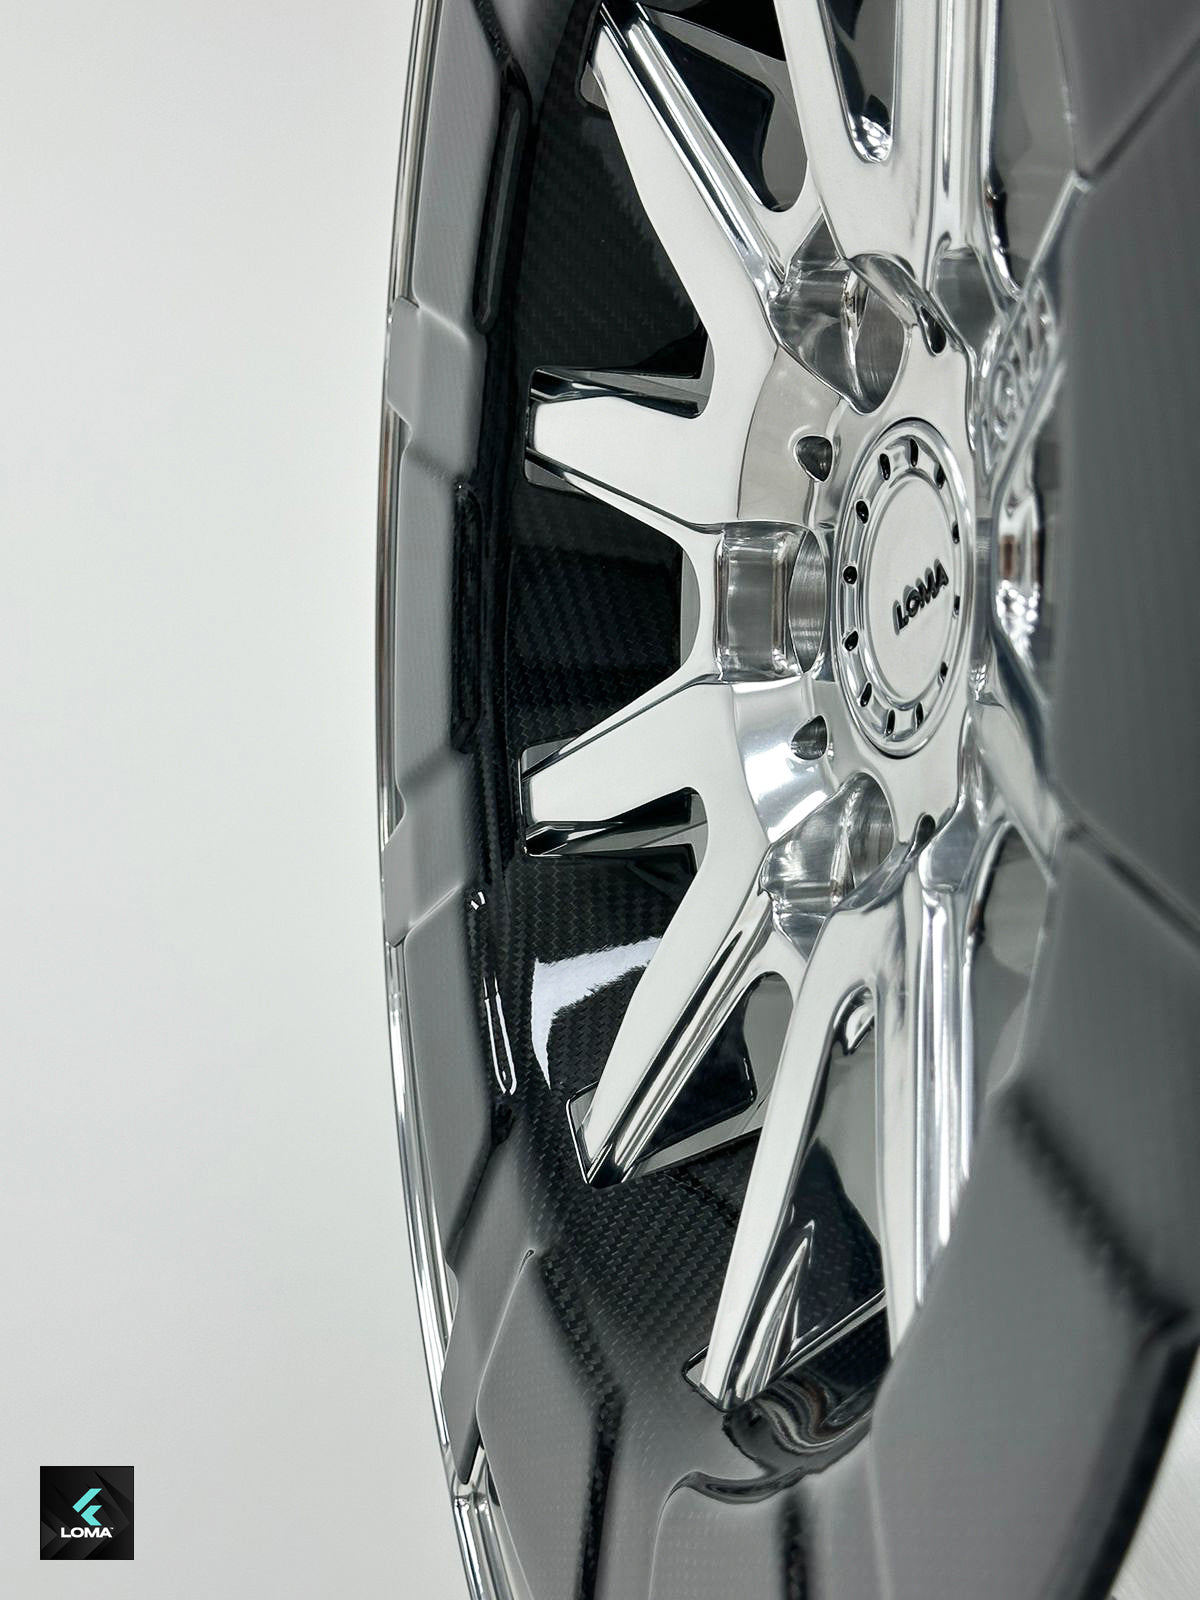 Hand polished Porsche 911 aftermarket rims by LOMA Forged wheels